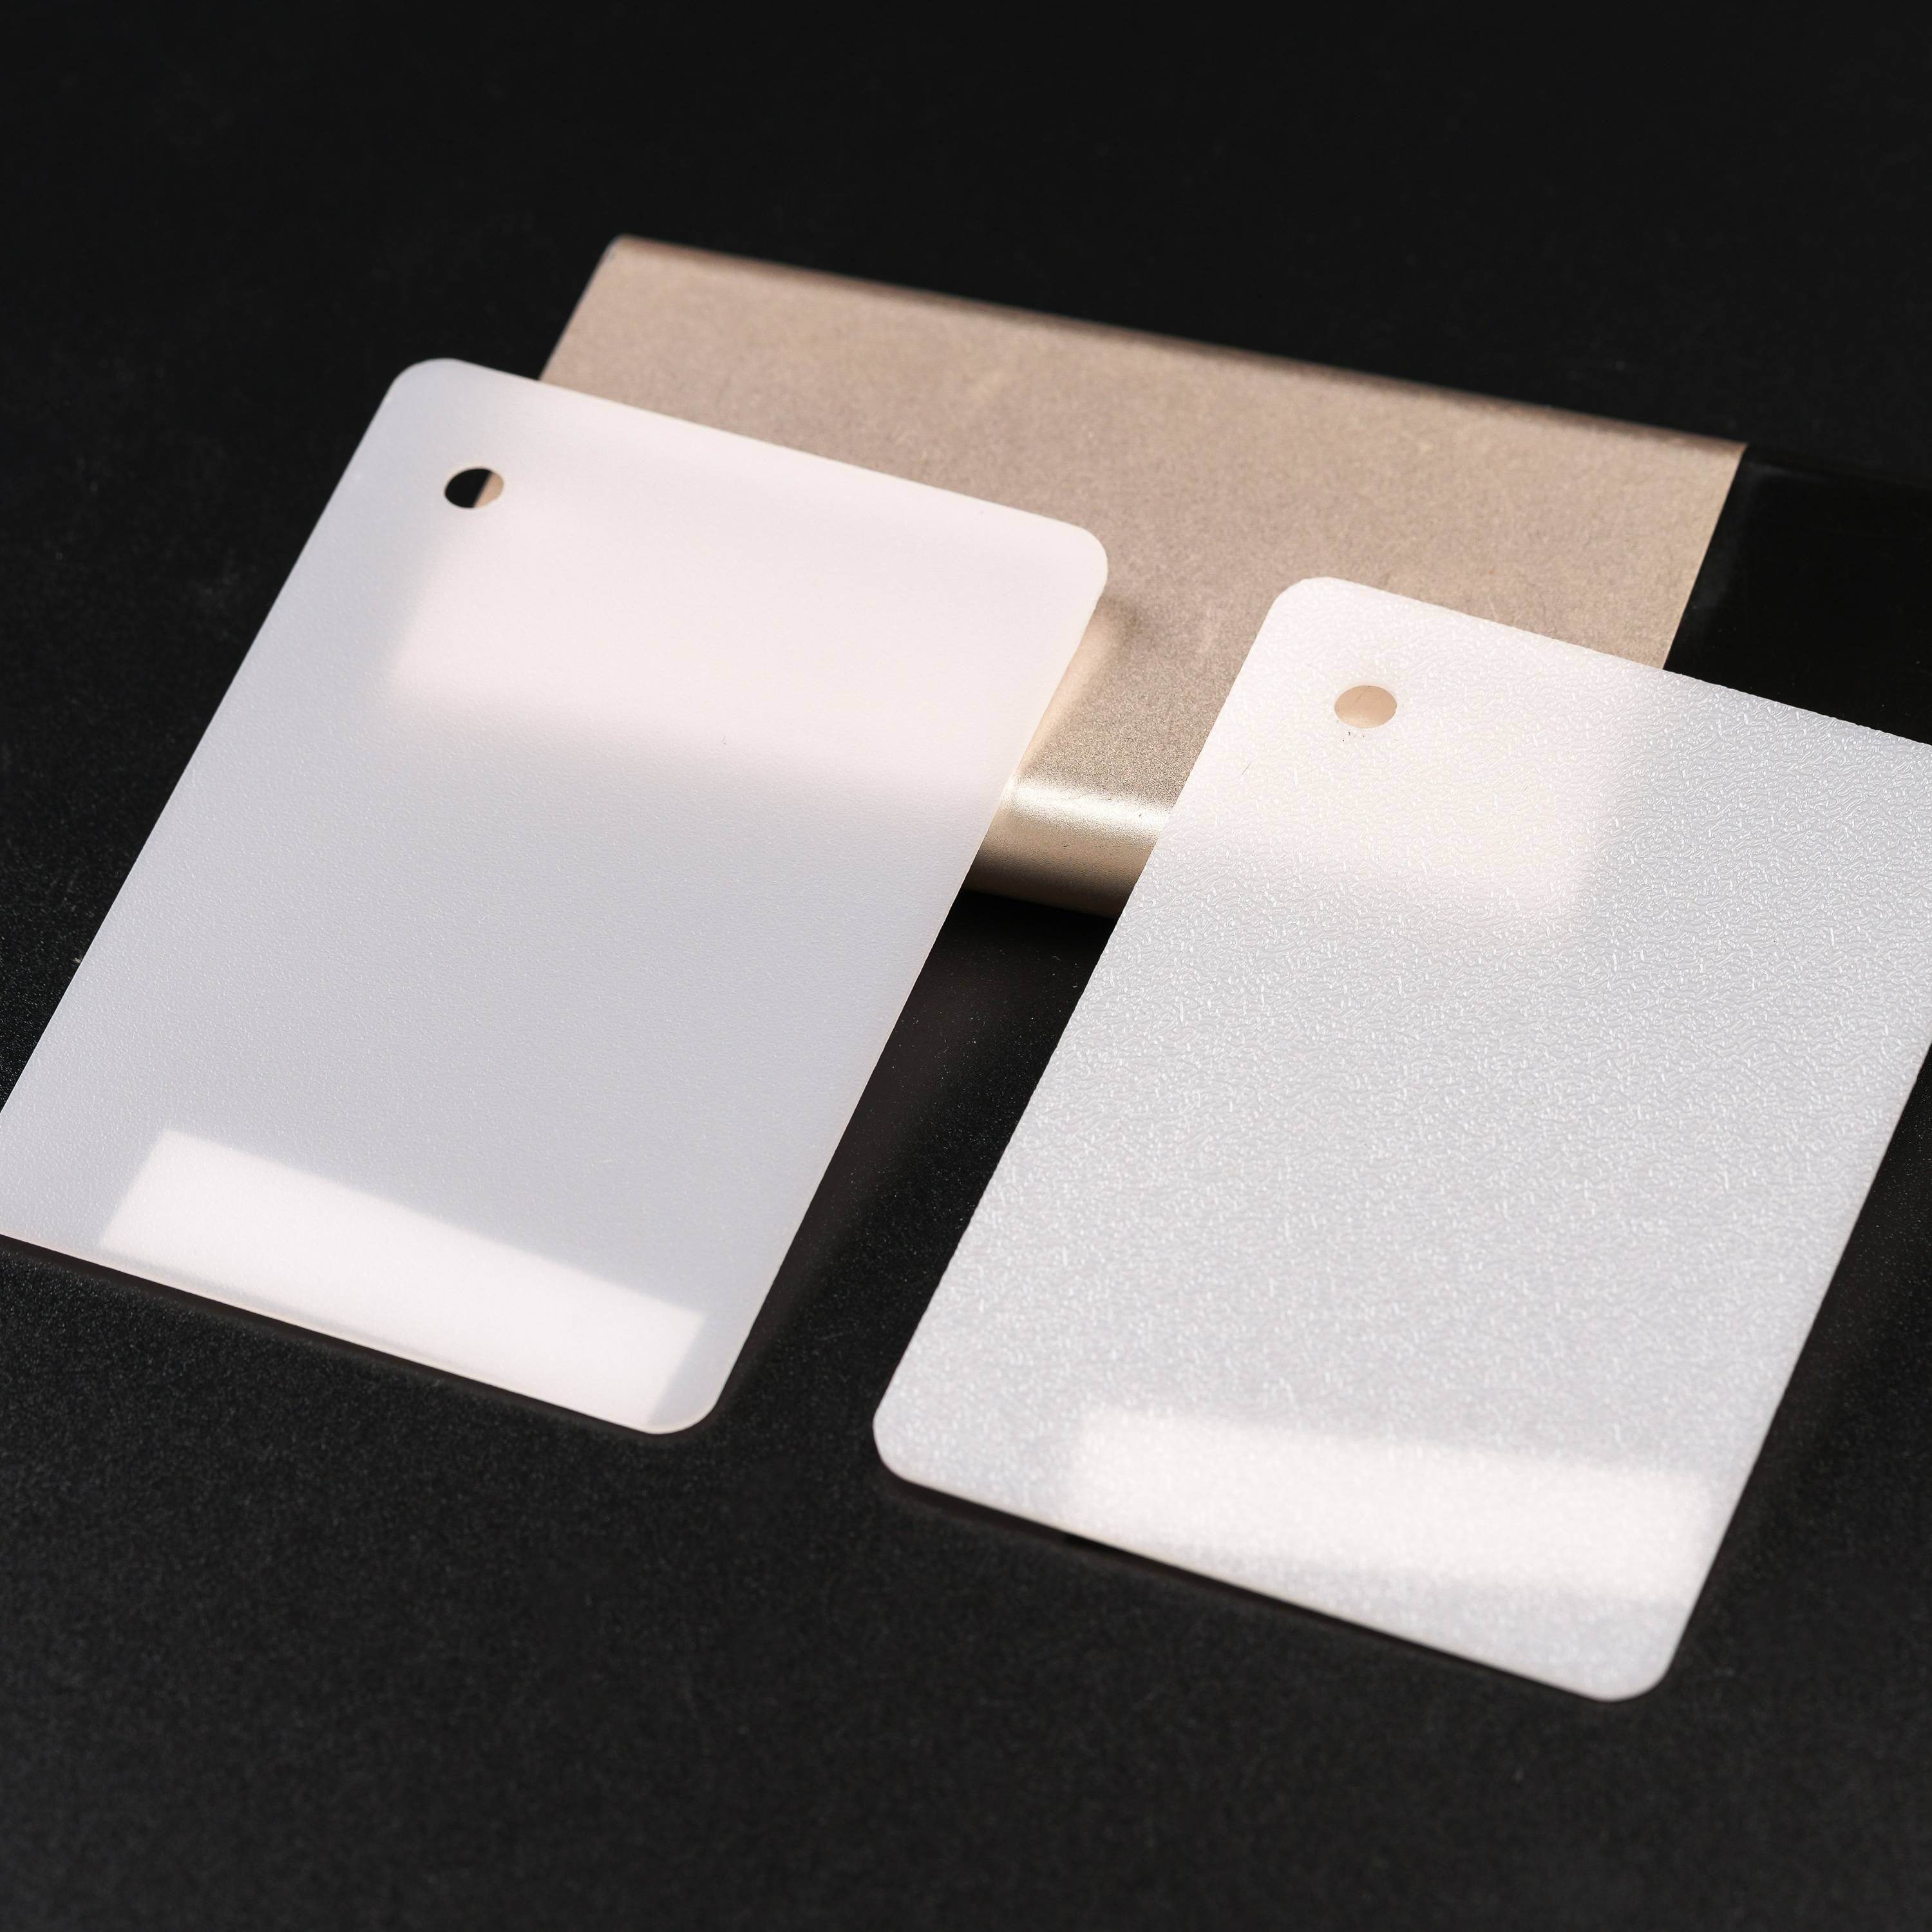 Frosted acrylic light guide plate